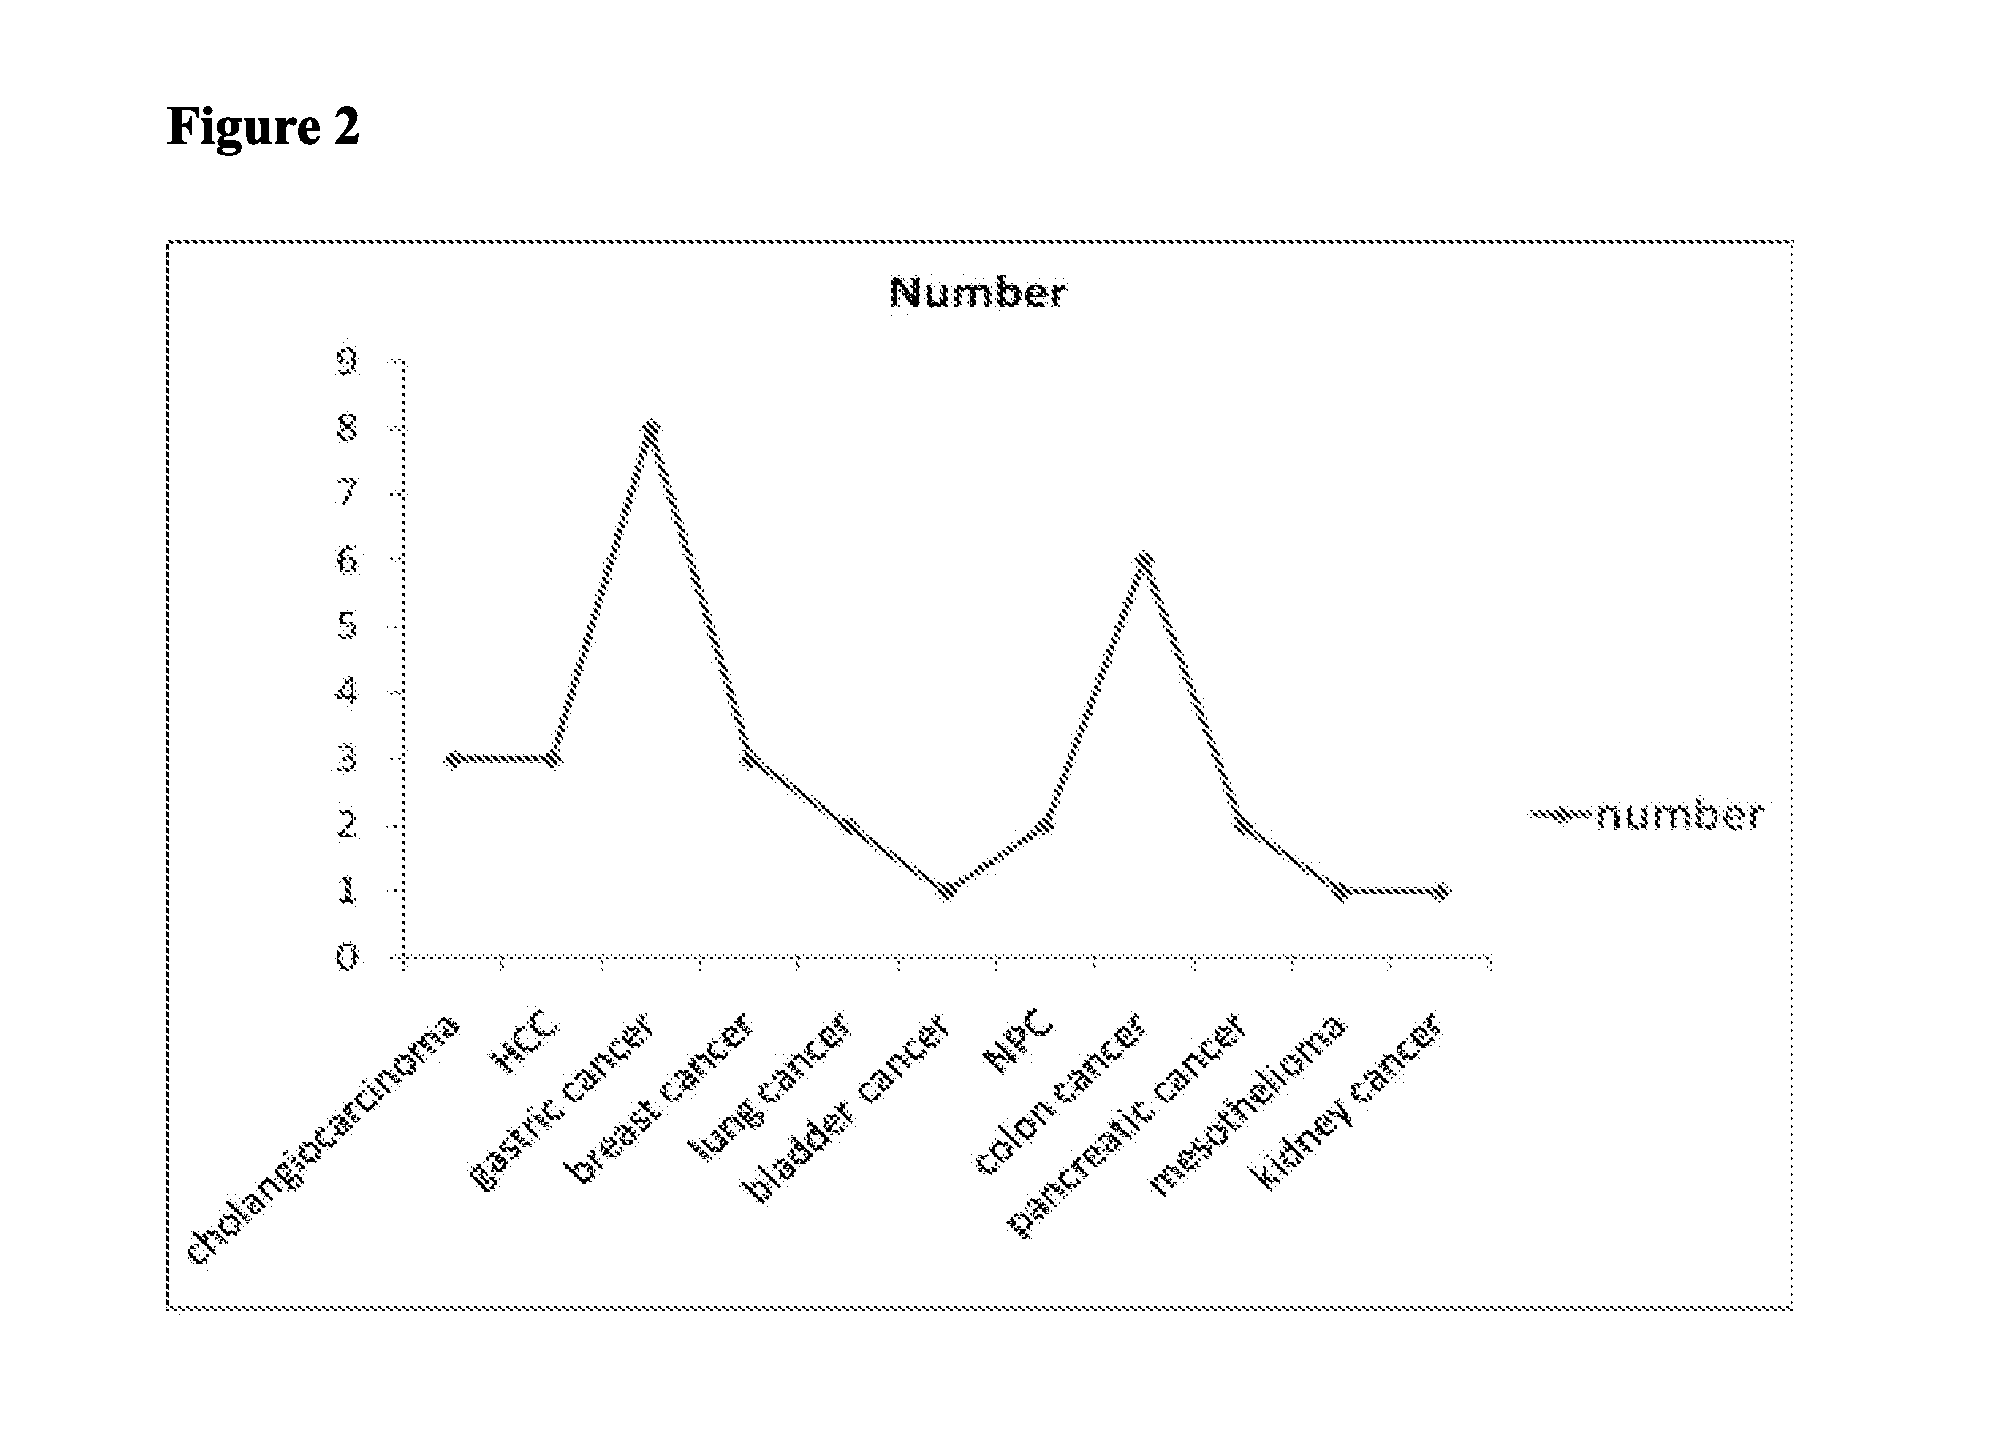 Methods for assisting anti-cancer drugs